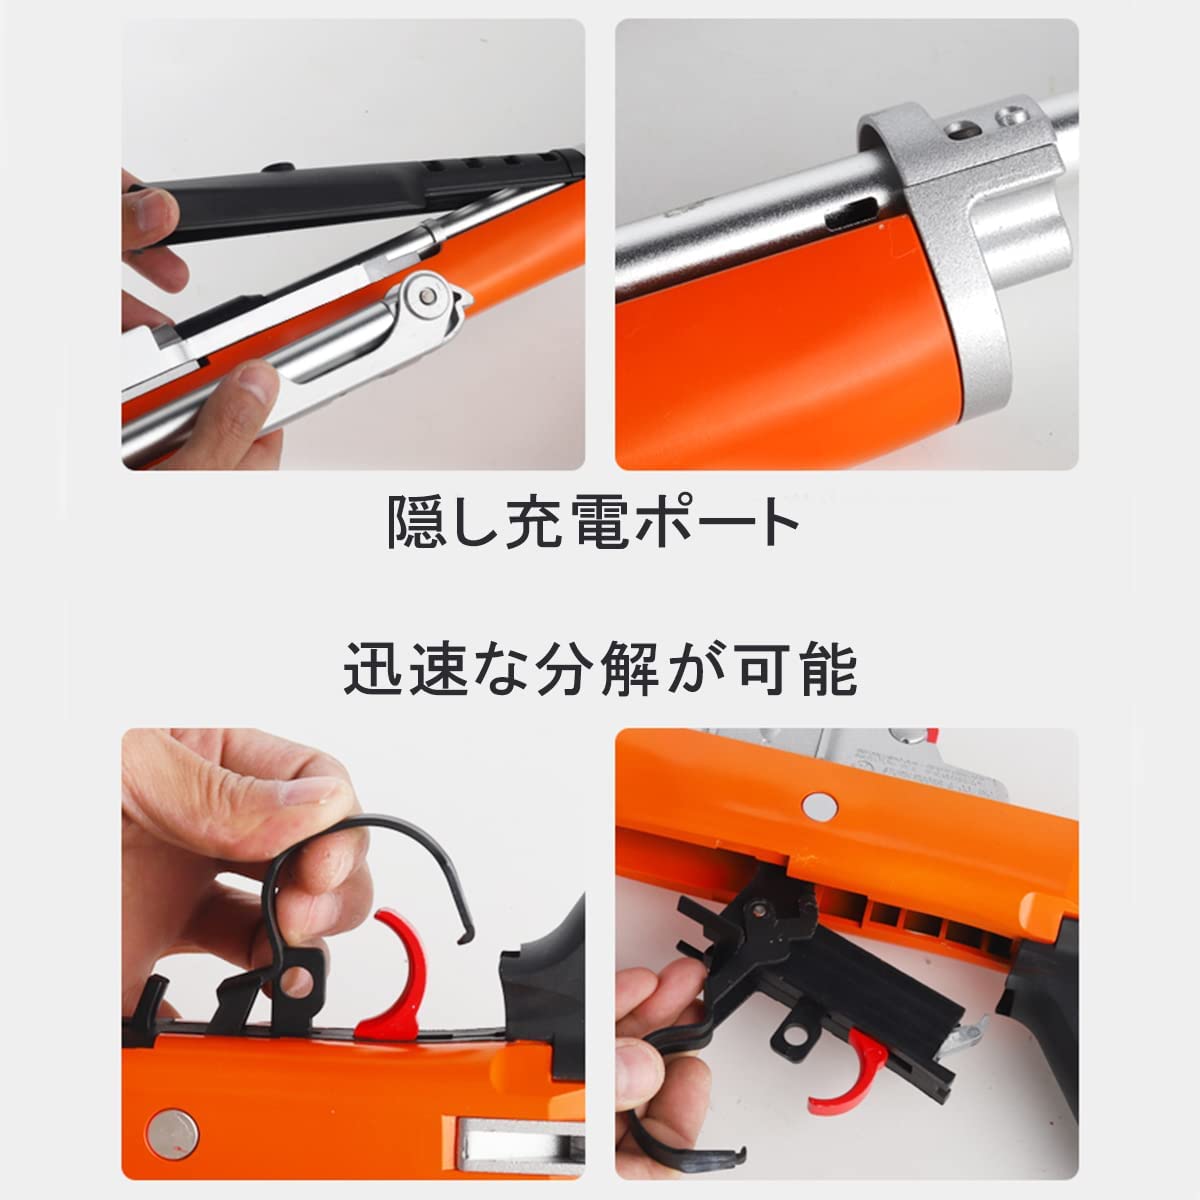 Mini‐14 rifle-like toy gun, shell ejection type, no bullet firing function, laser irradiation, continuous shell ejection, finger action blowback 